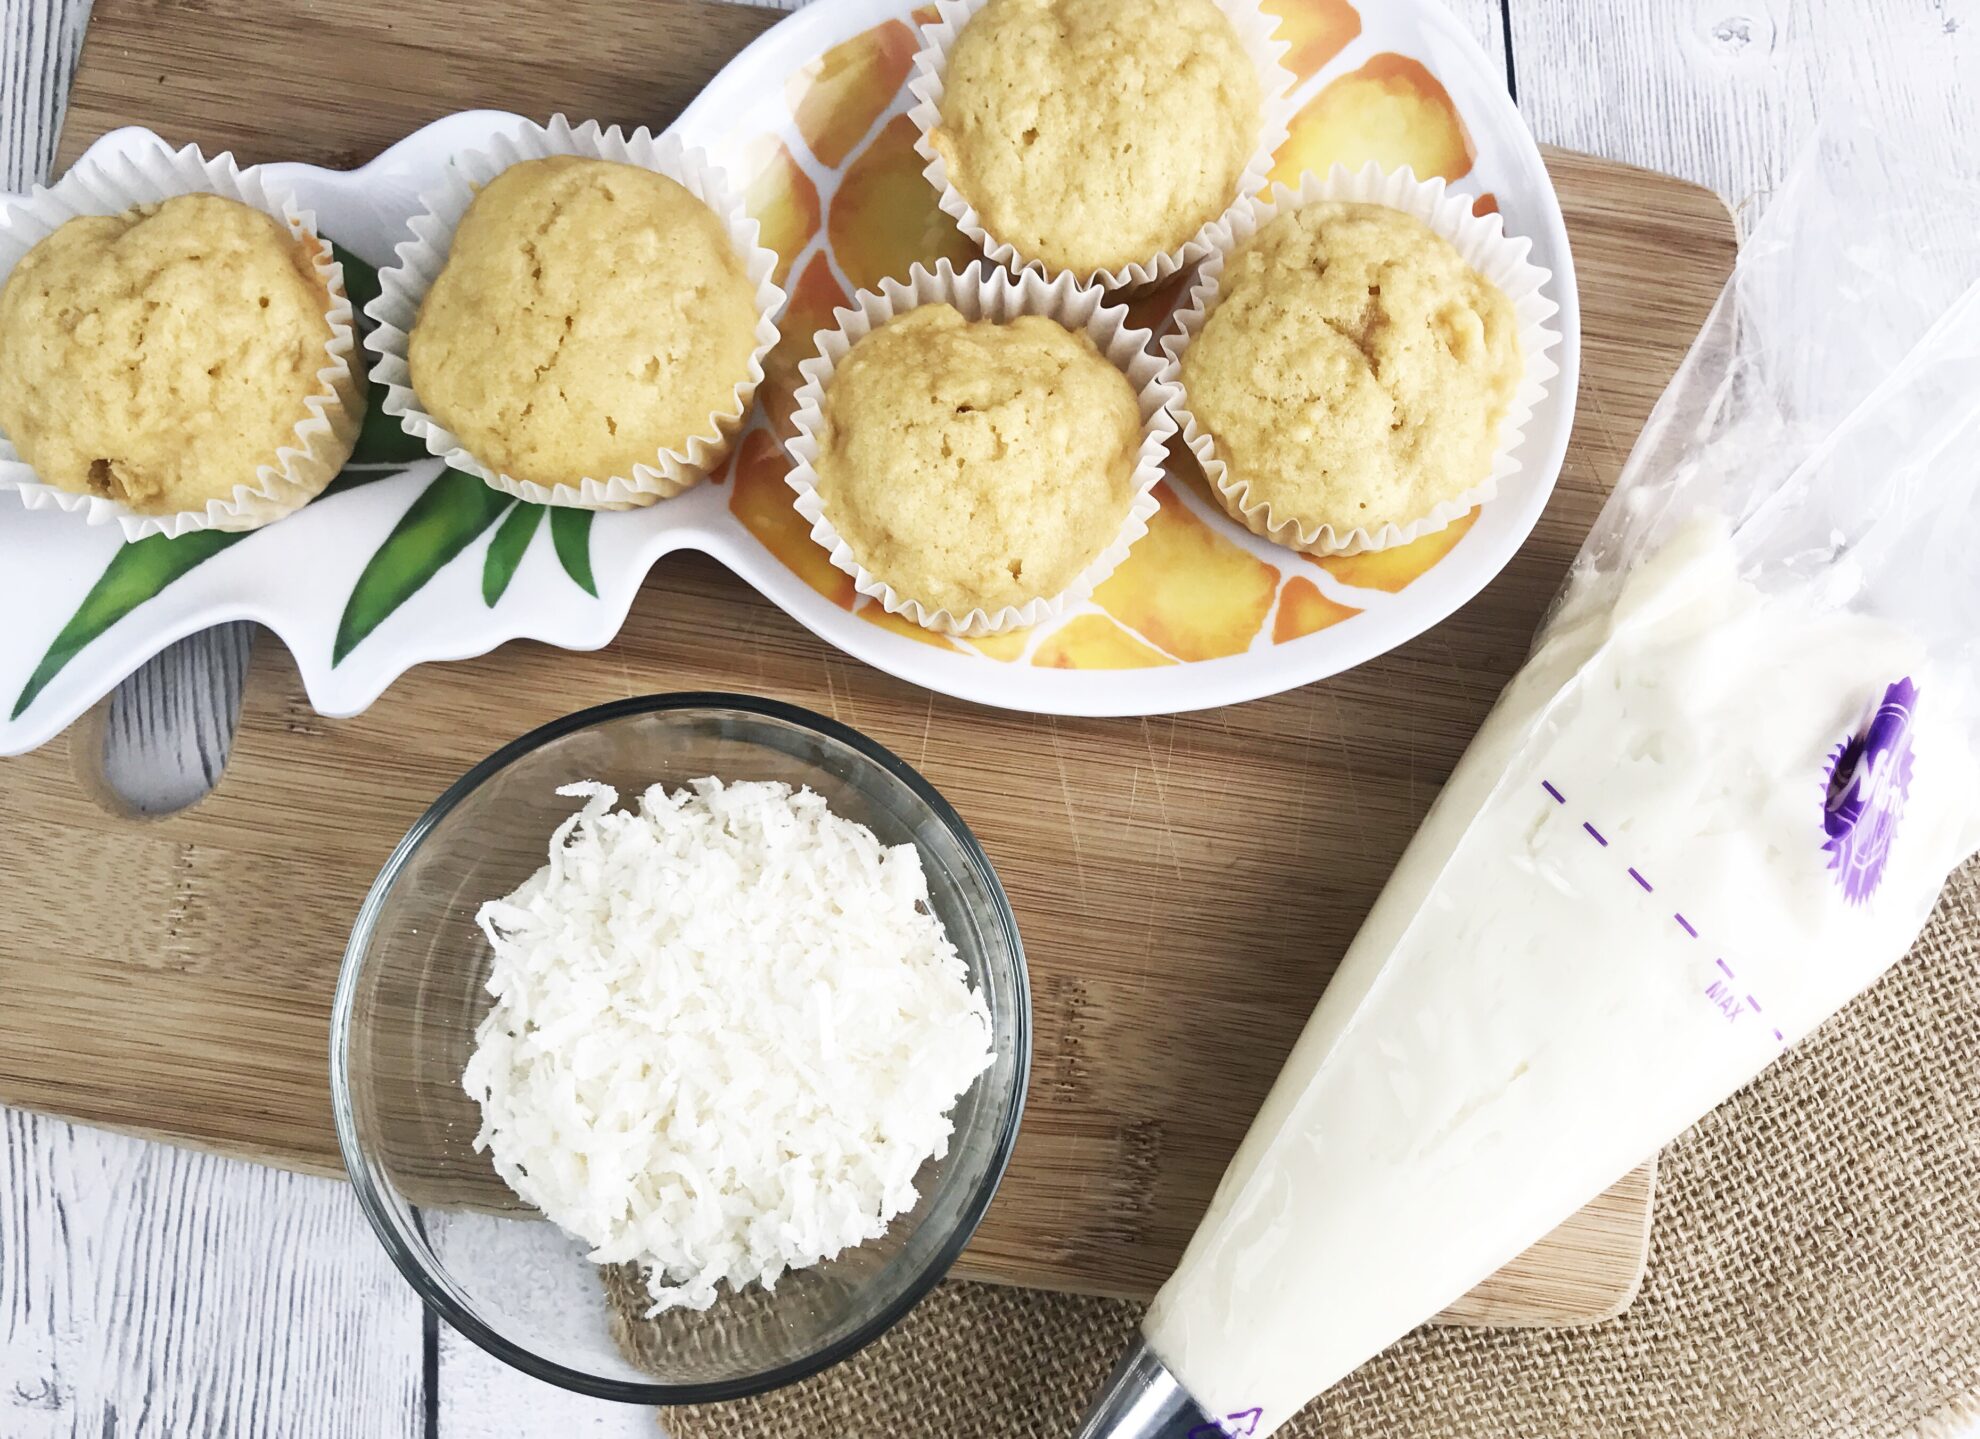 These Pineapple Cupcakes will whisk you away to the Tropics! The perfect refreshing dessert as a snack or for a birthday on 5DollarDinners!